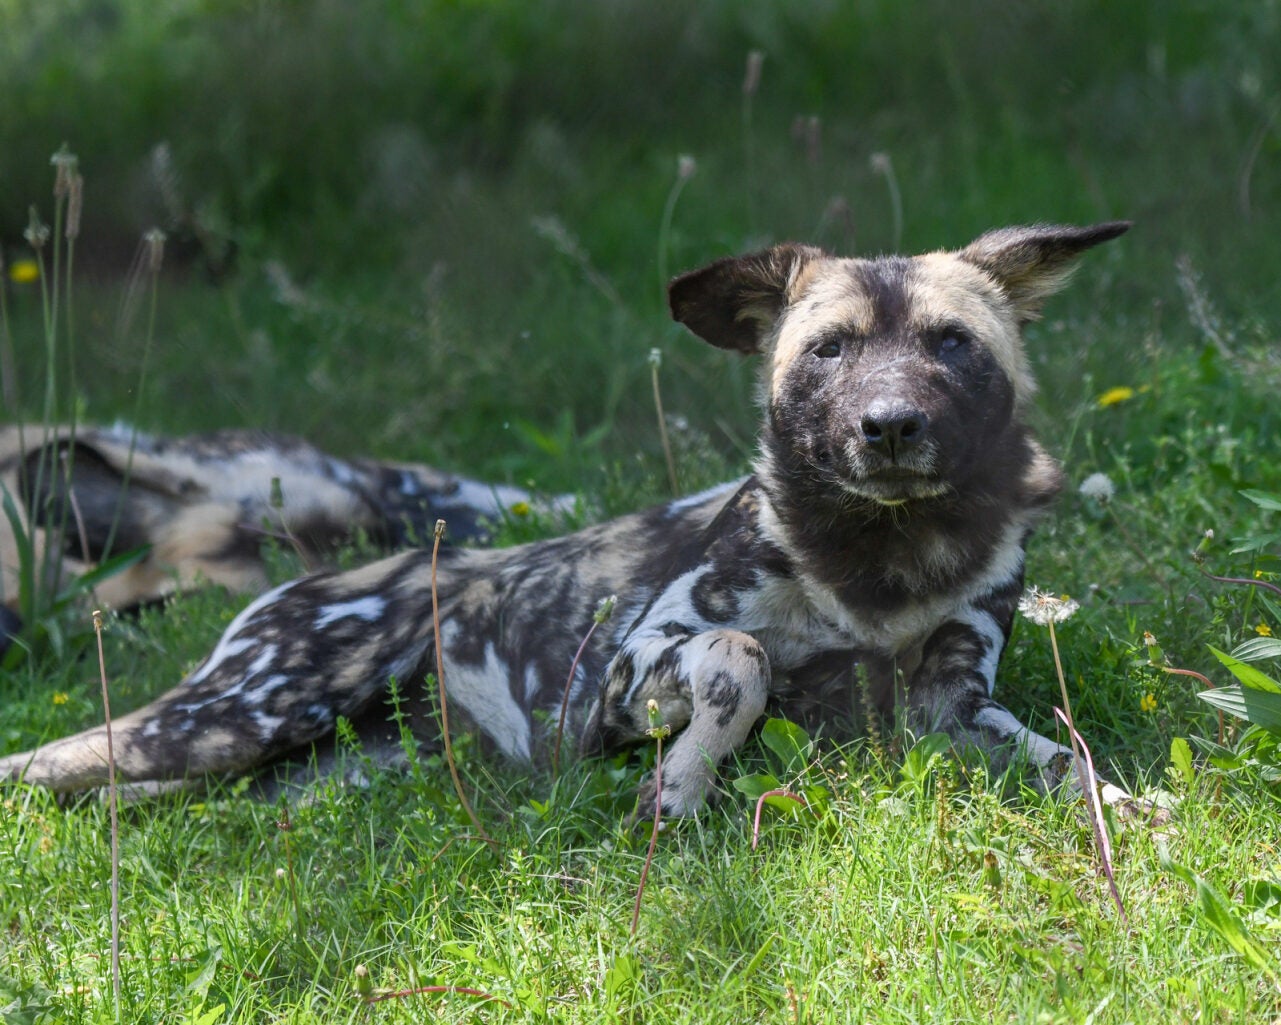 OKC Zoo has looked after African painted dogs since 1972